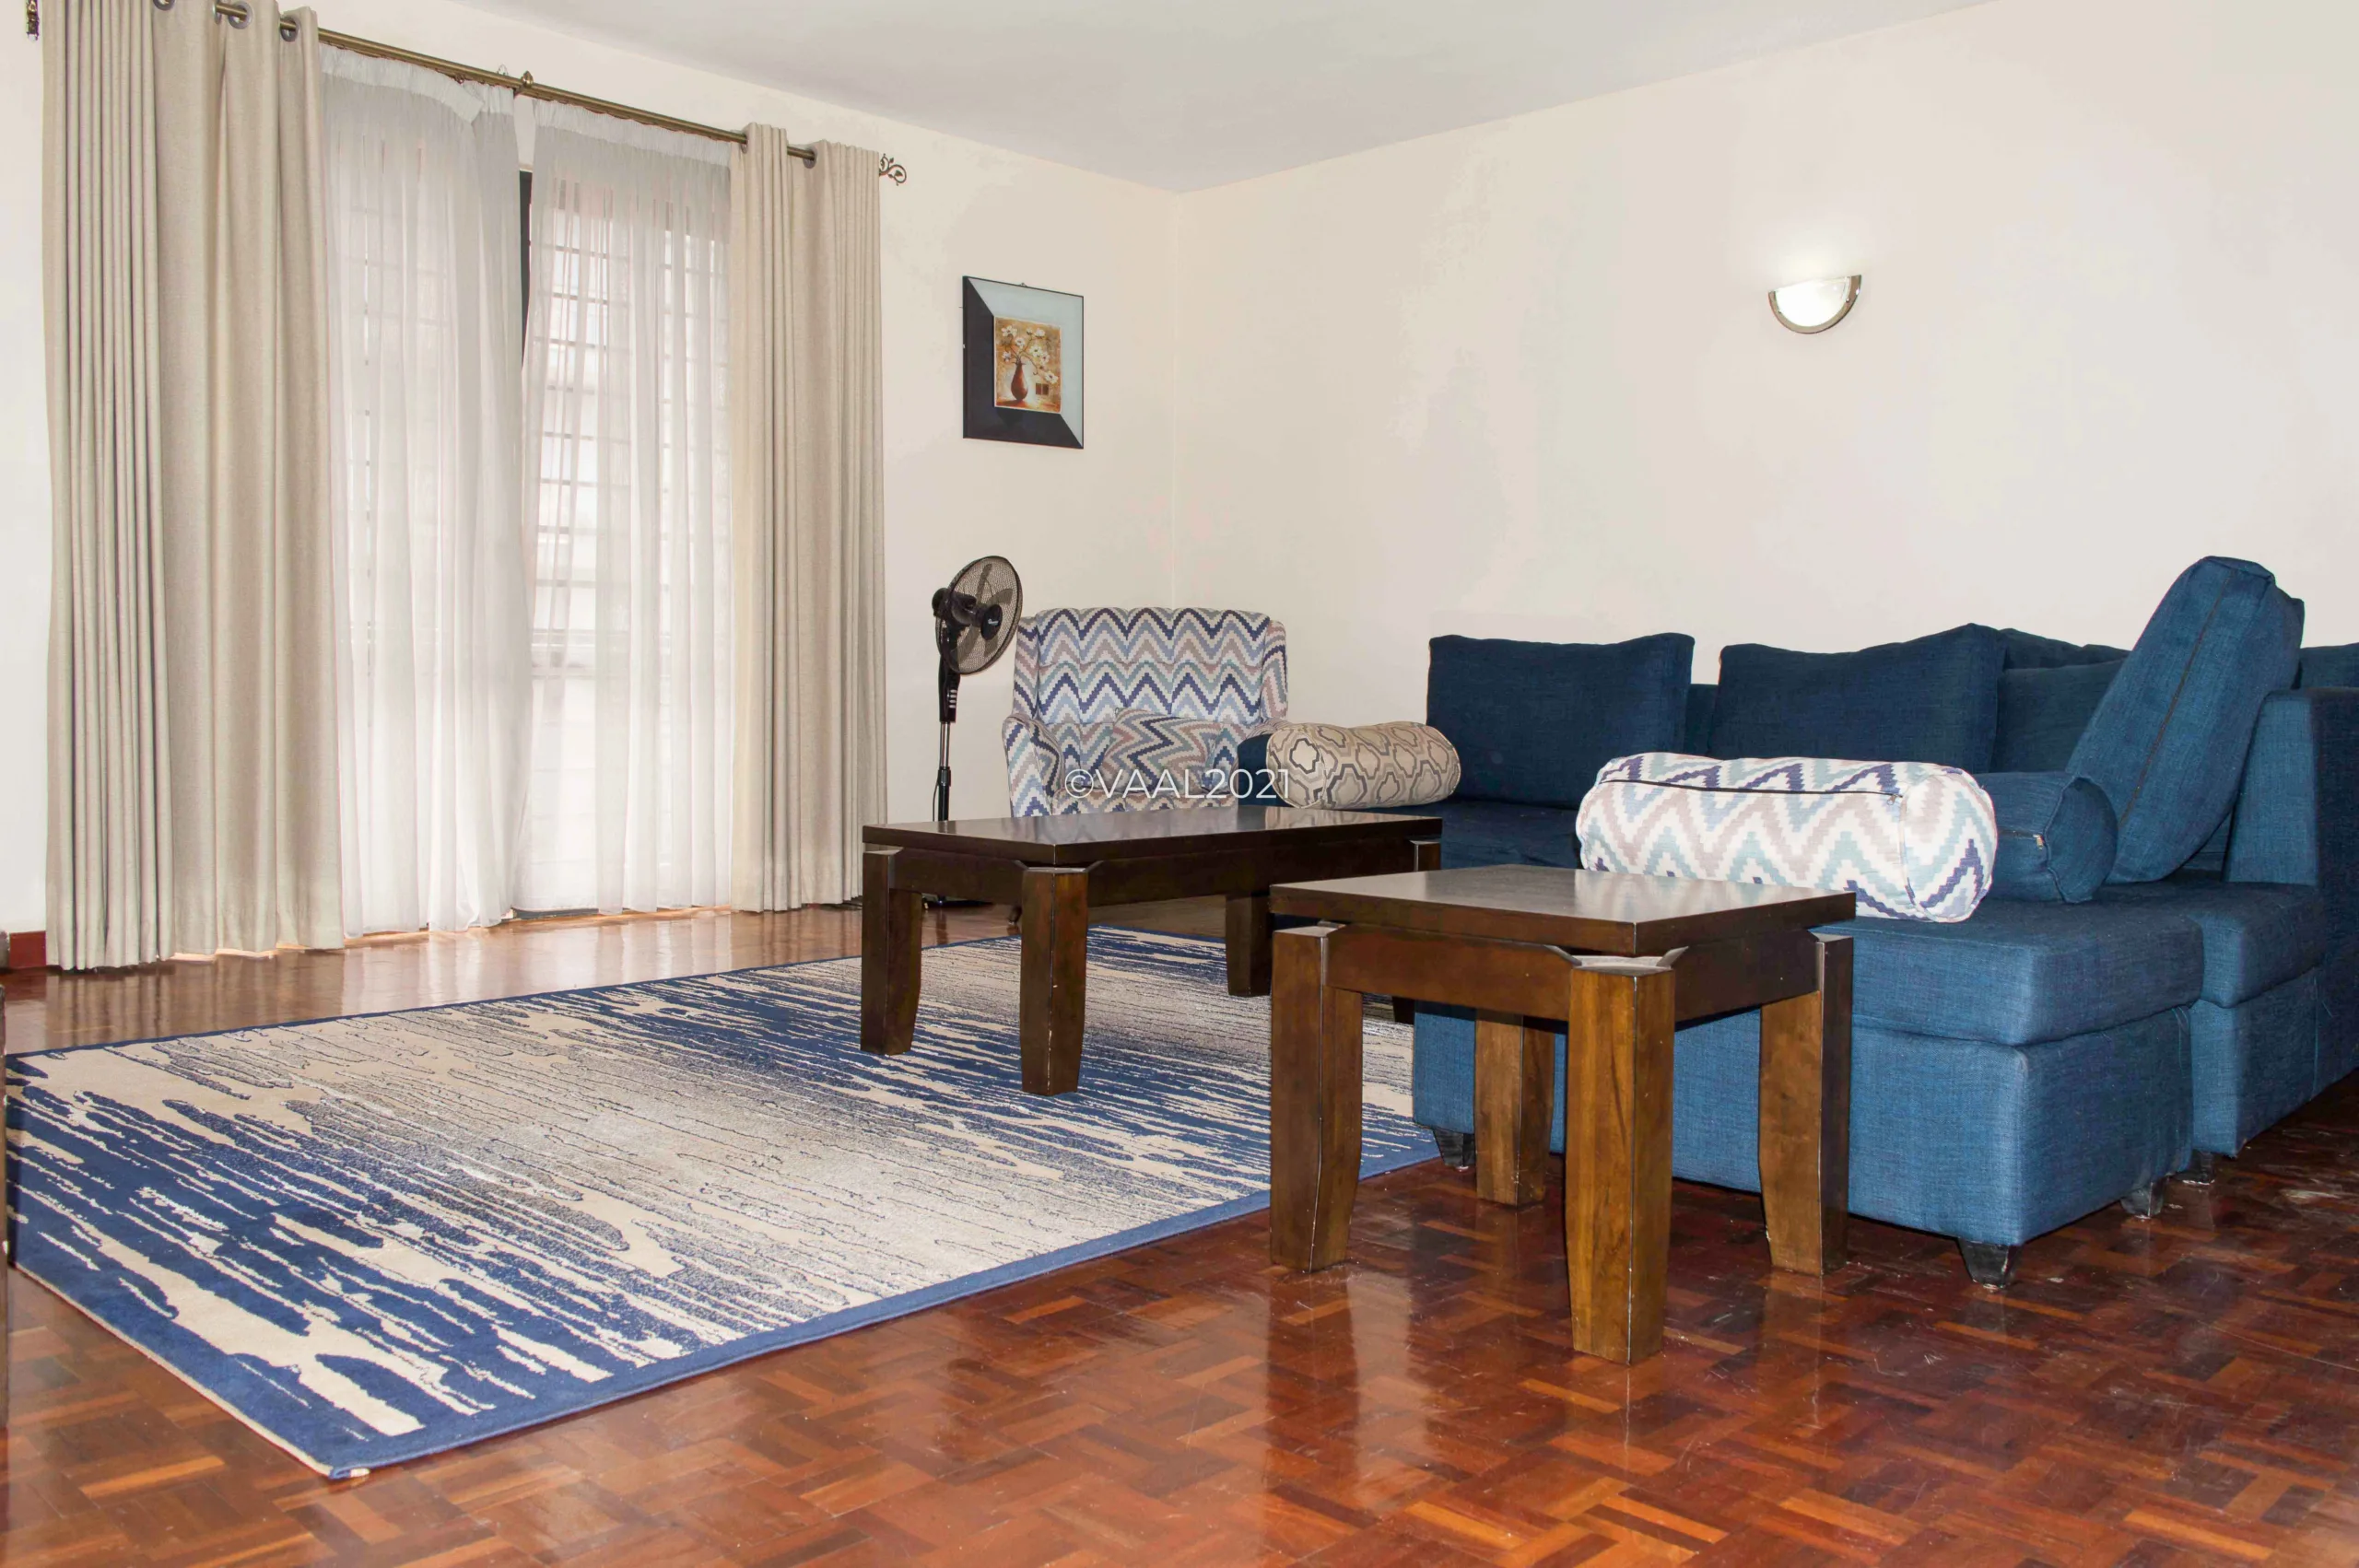 3 bedroom apartments for rent in Kilimani